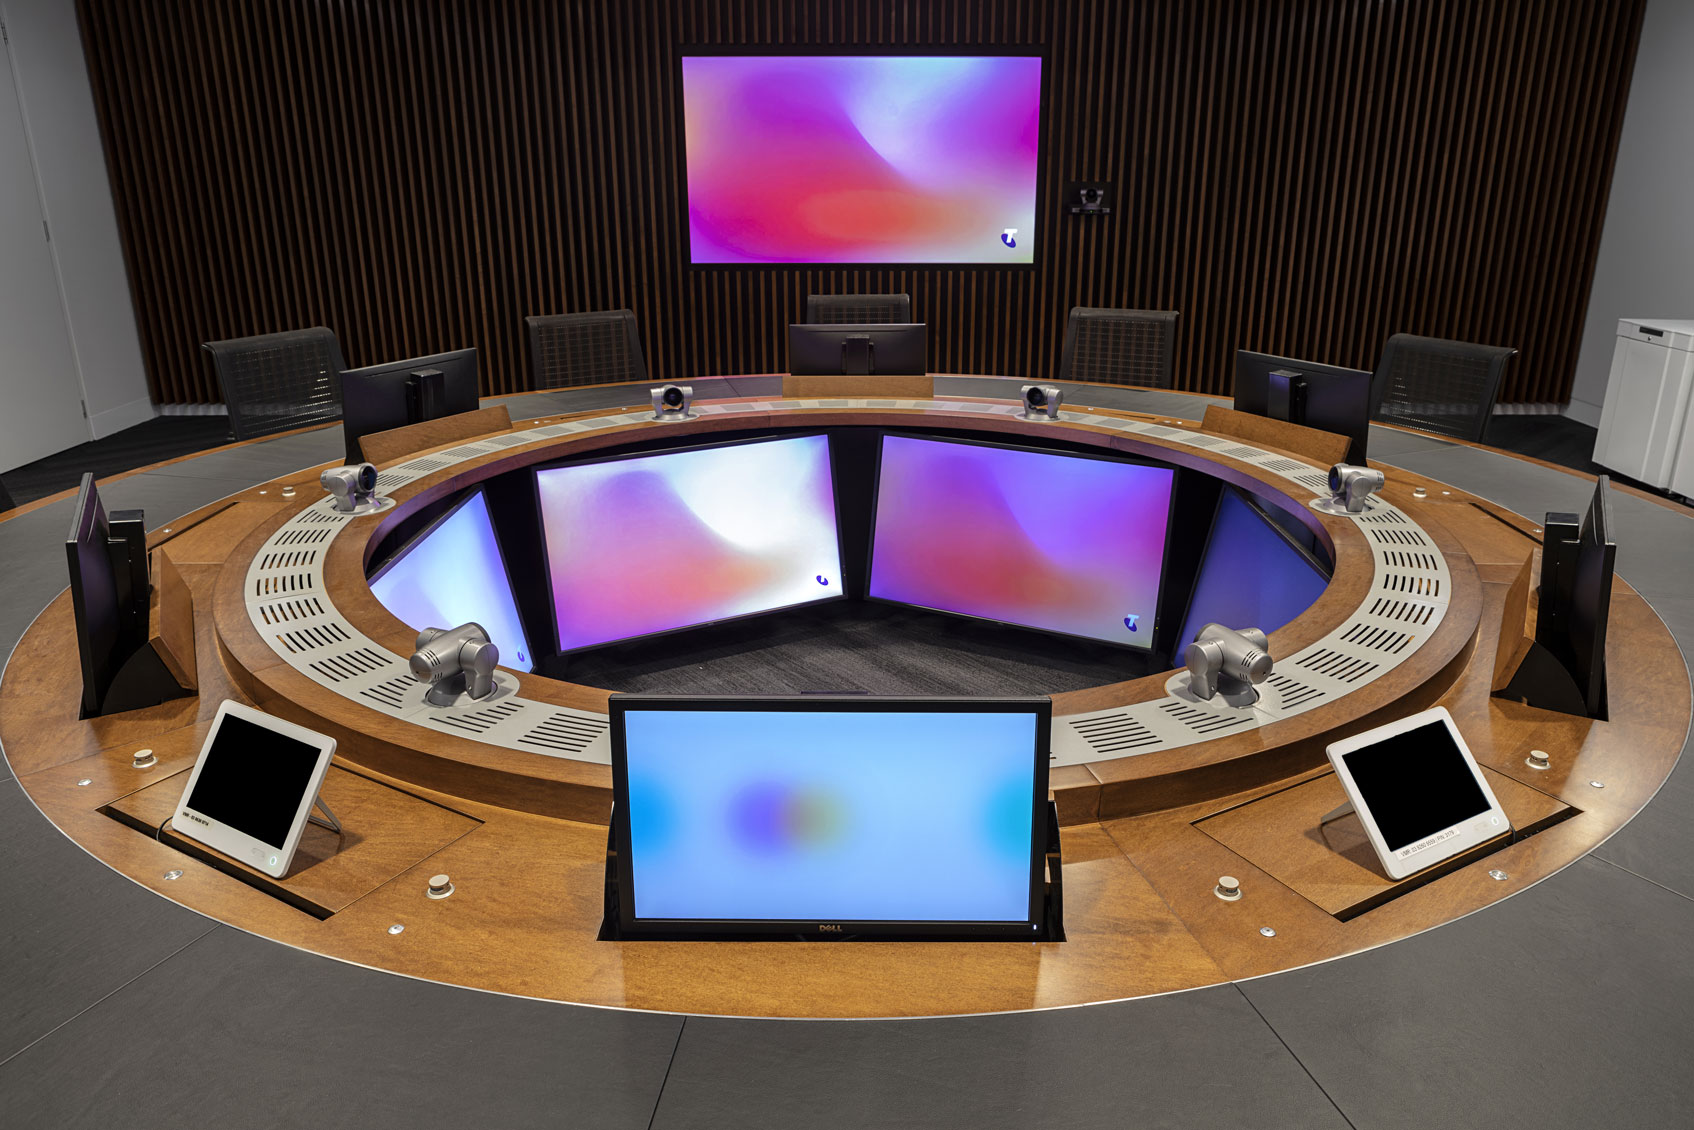 Telstra whirlpool room conference table